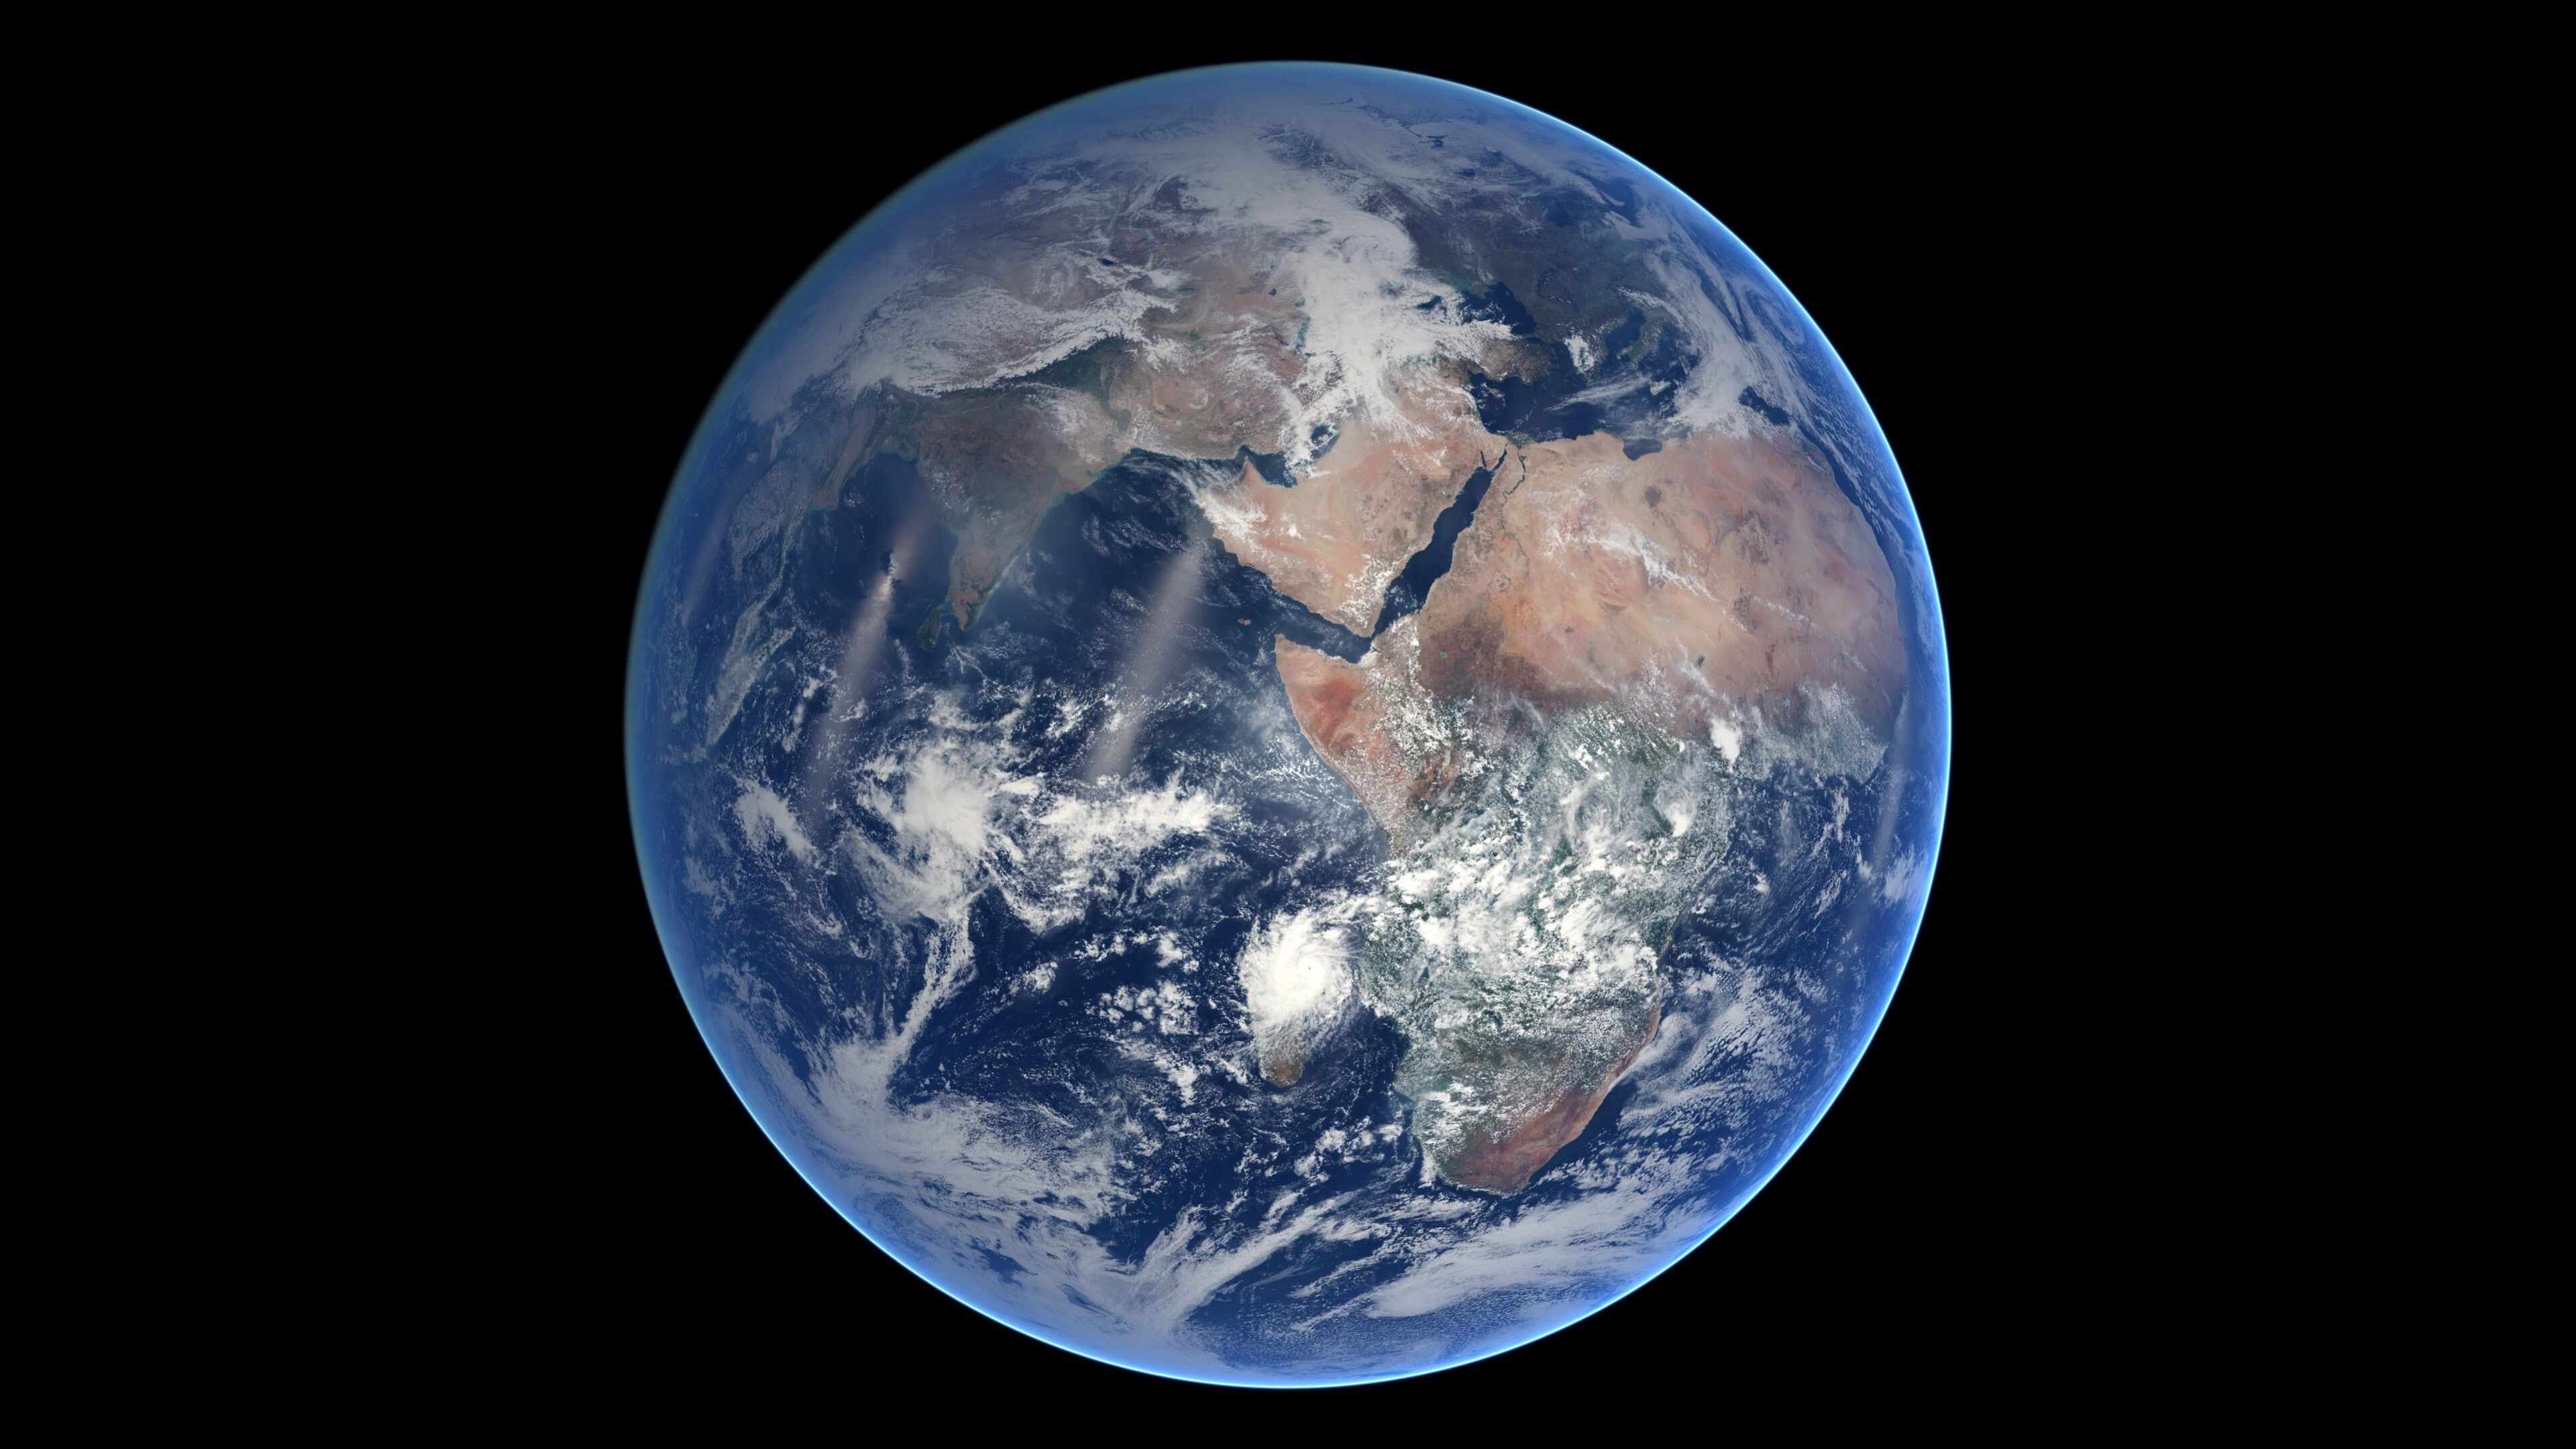 Earth: Space, Blue planet, NASA, Solar System, Continents, Atmosphere. 3840x2160 4K Wallpaper.